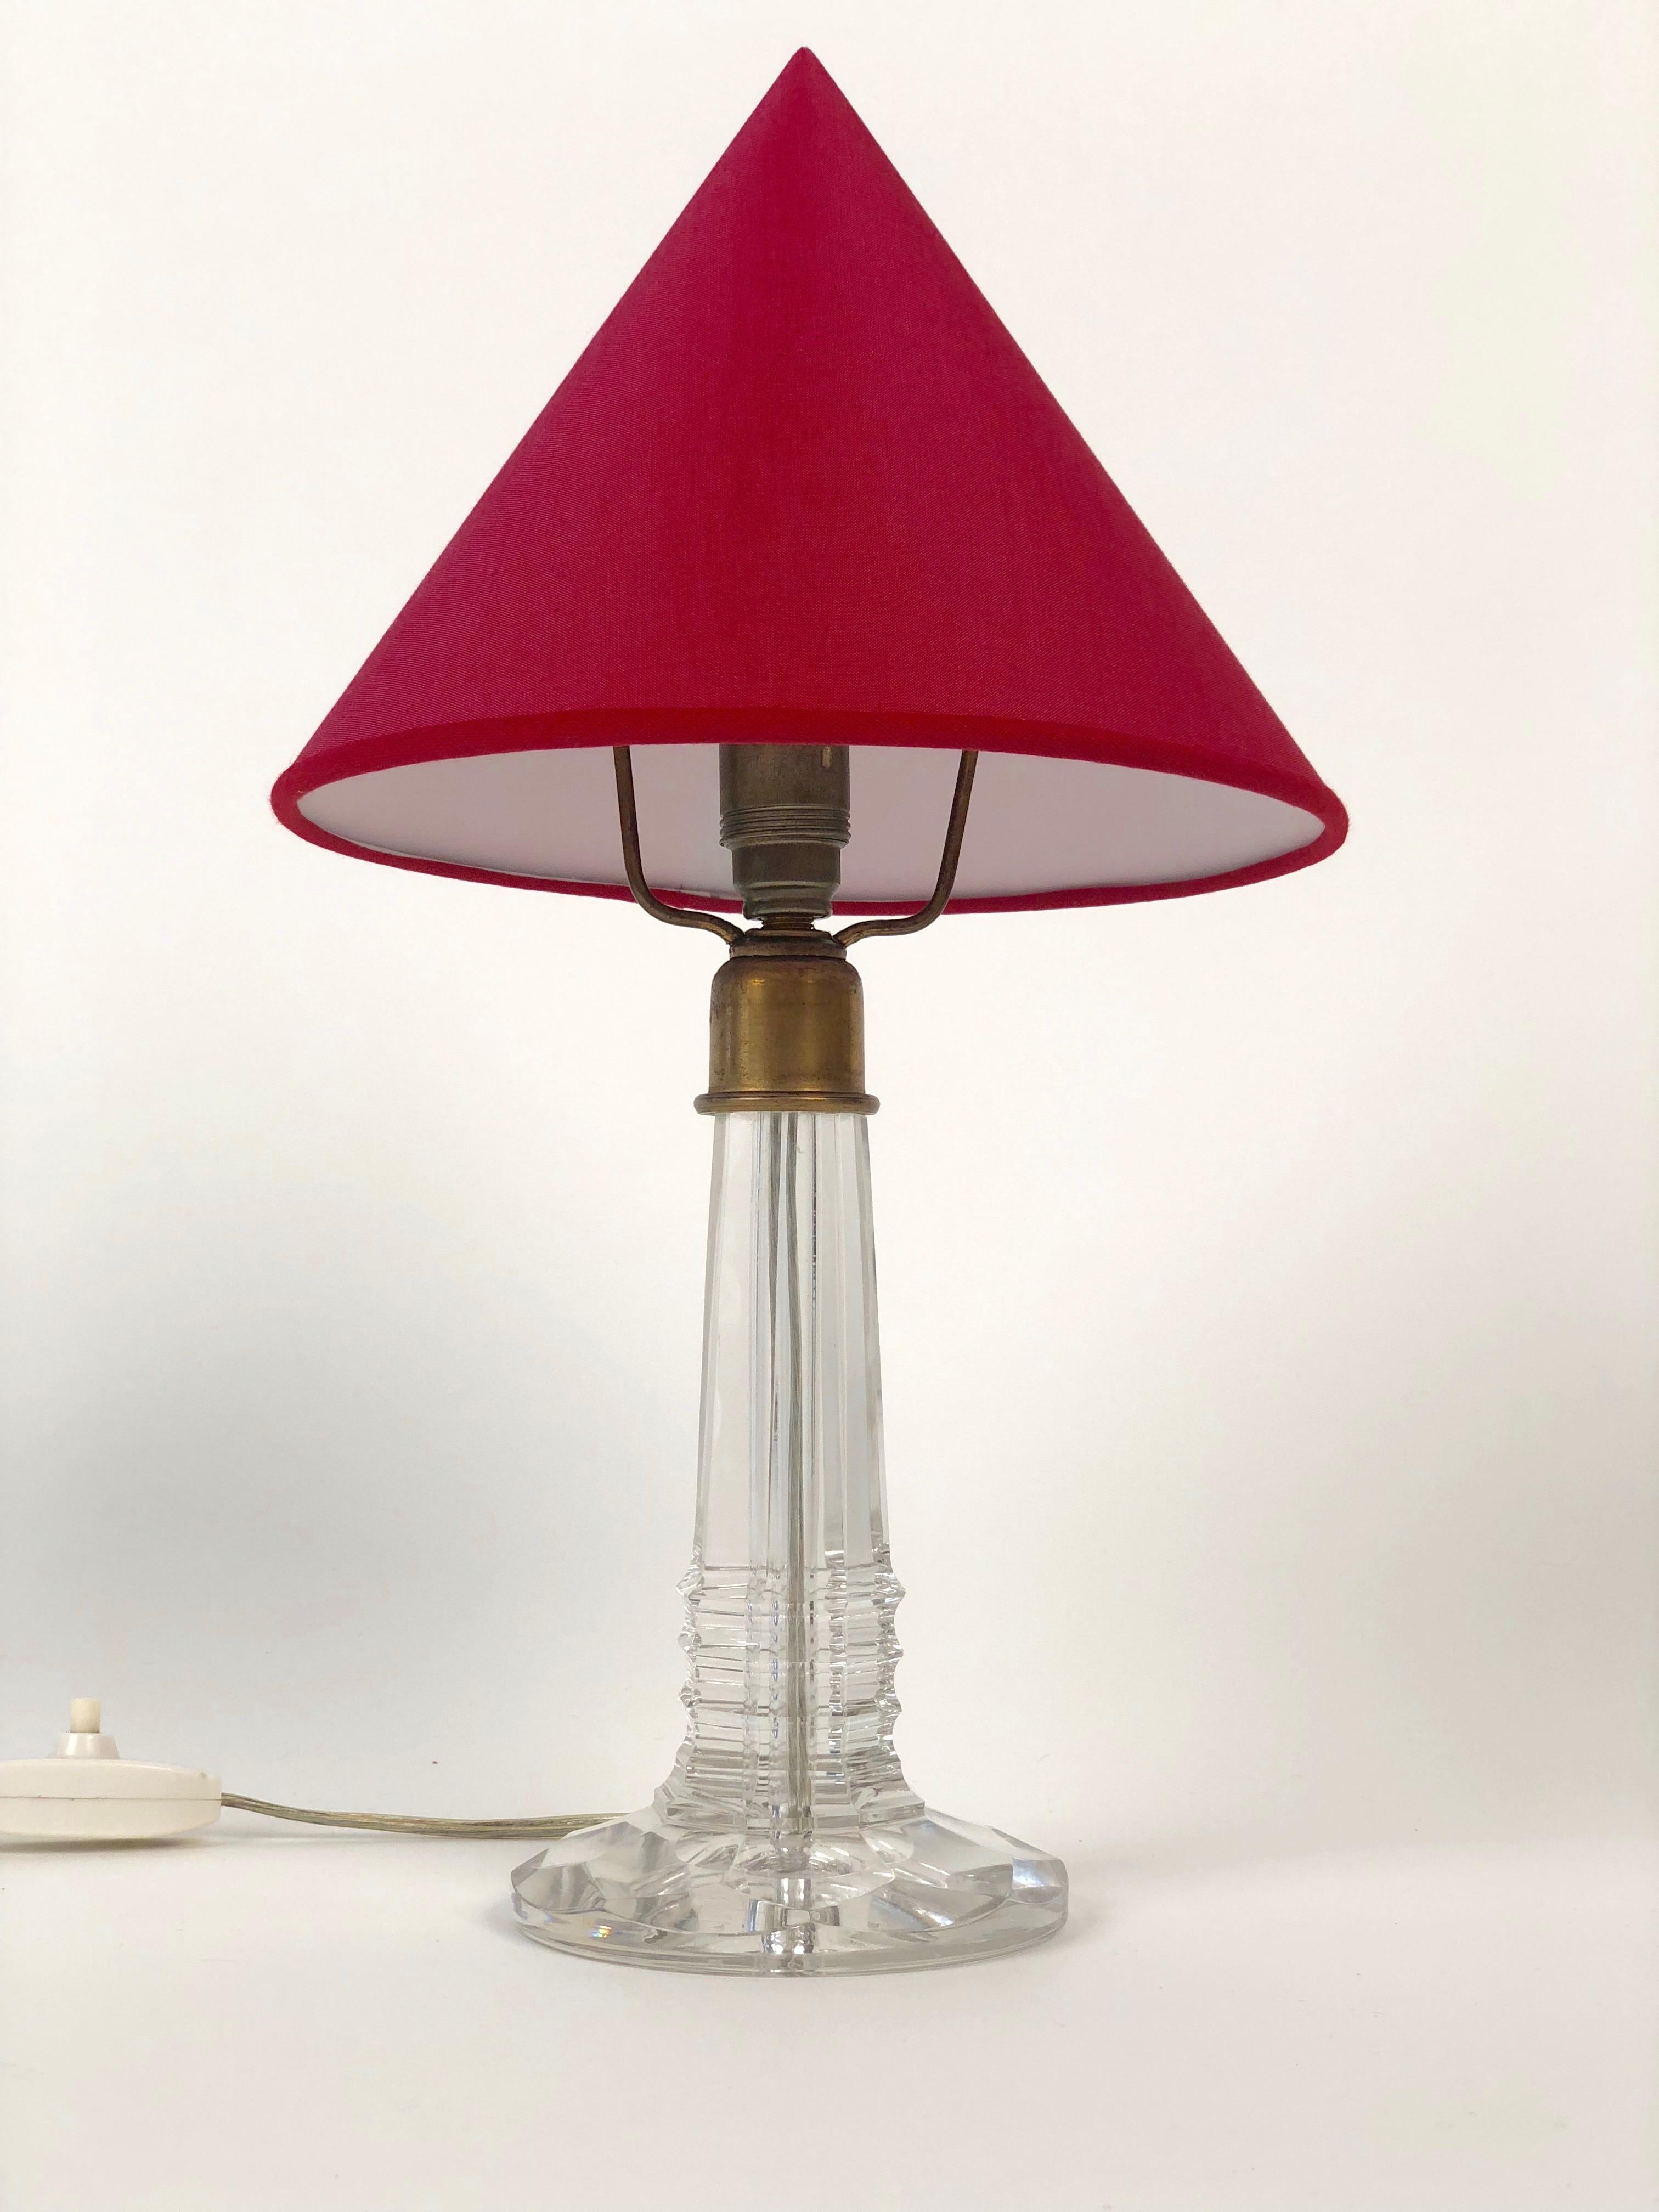 Charming small table lamp with a base formed through cut glass and brass montage elements.
A cone shape shade in red silk, is based on the original form.